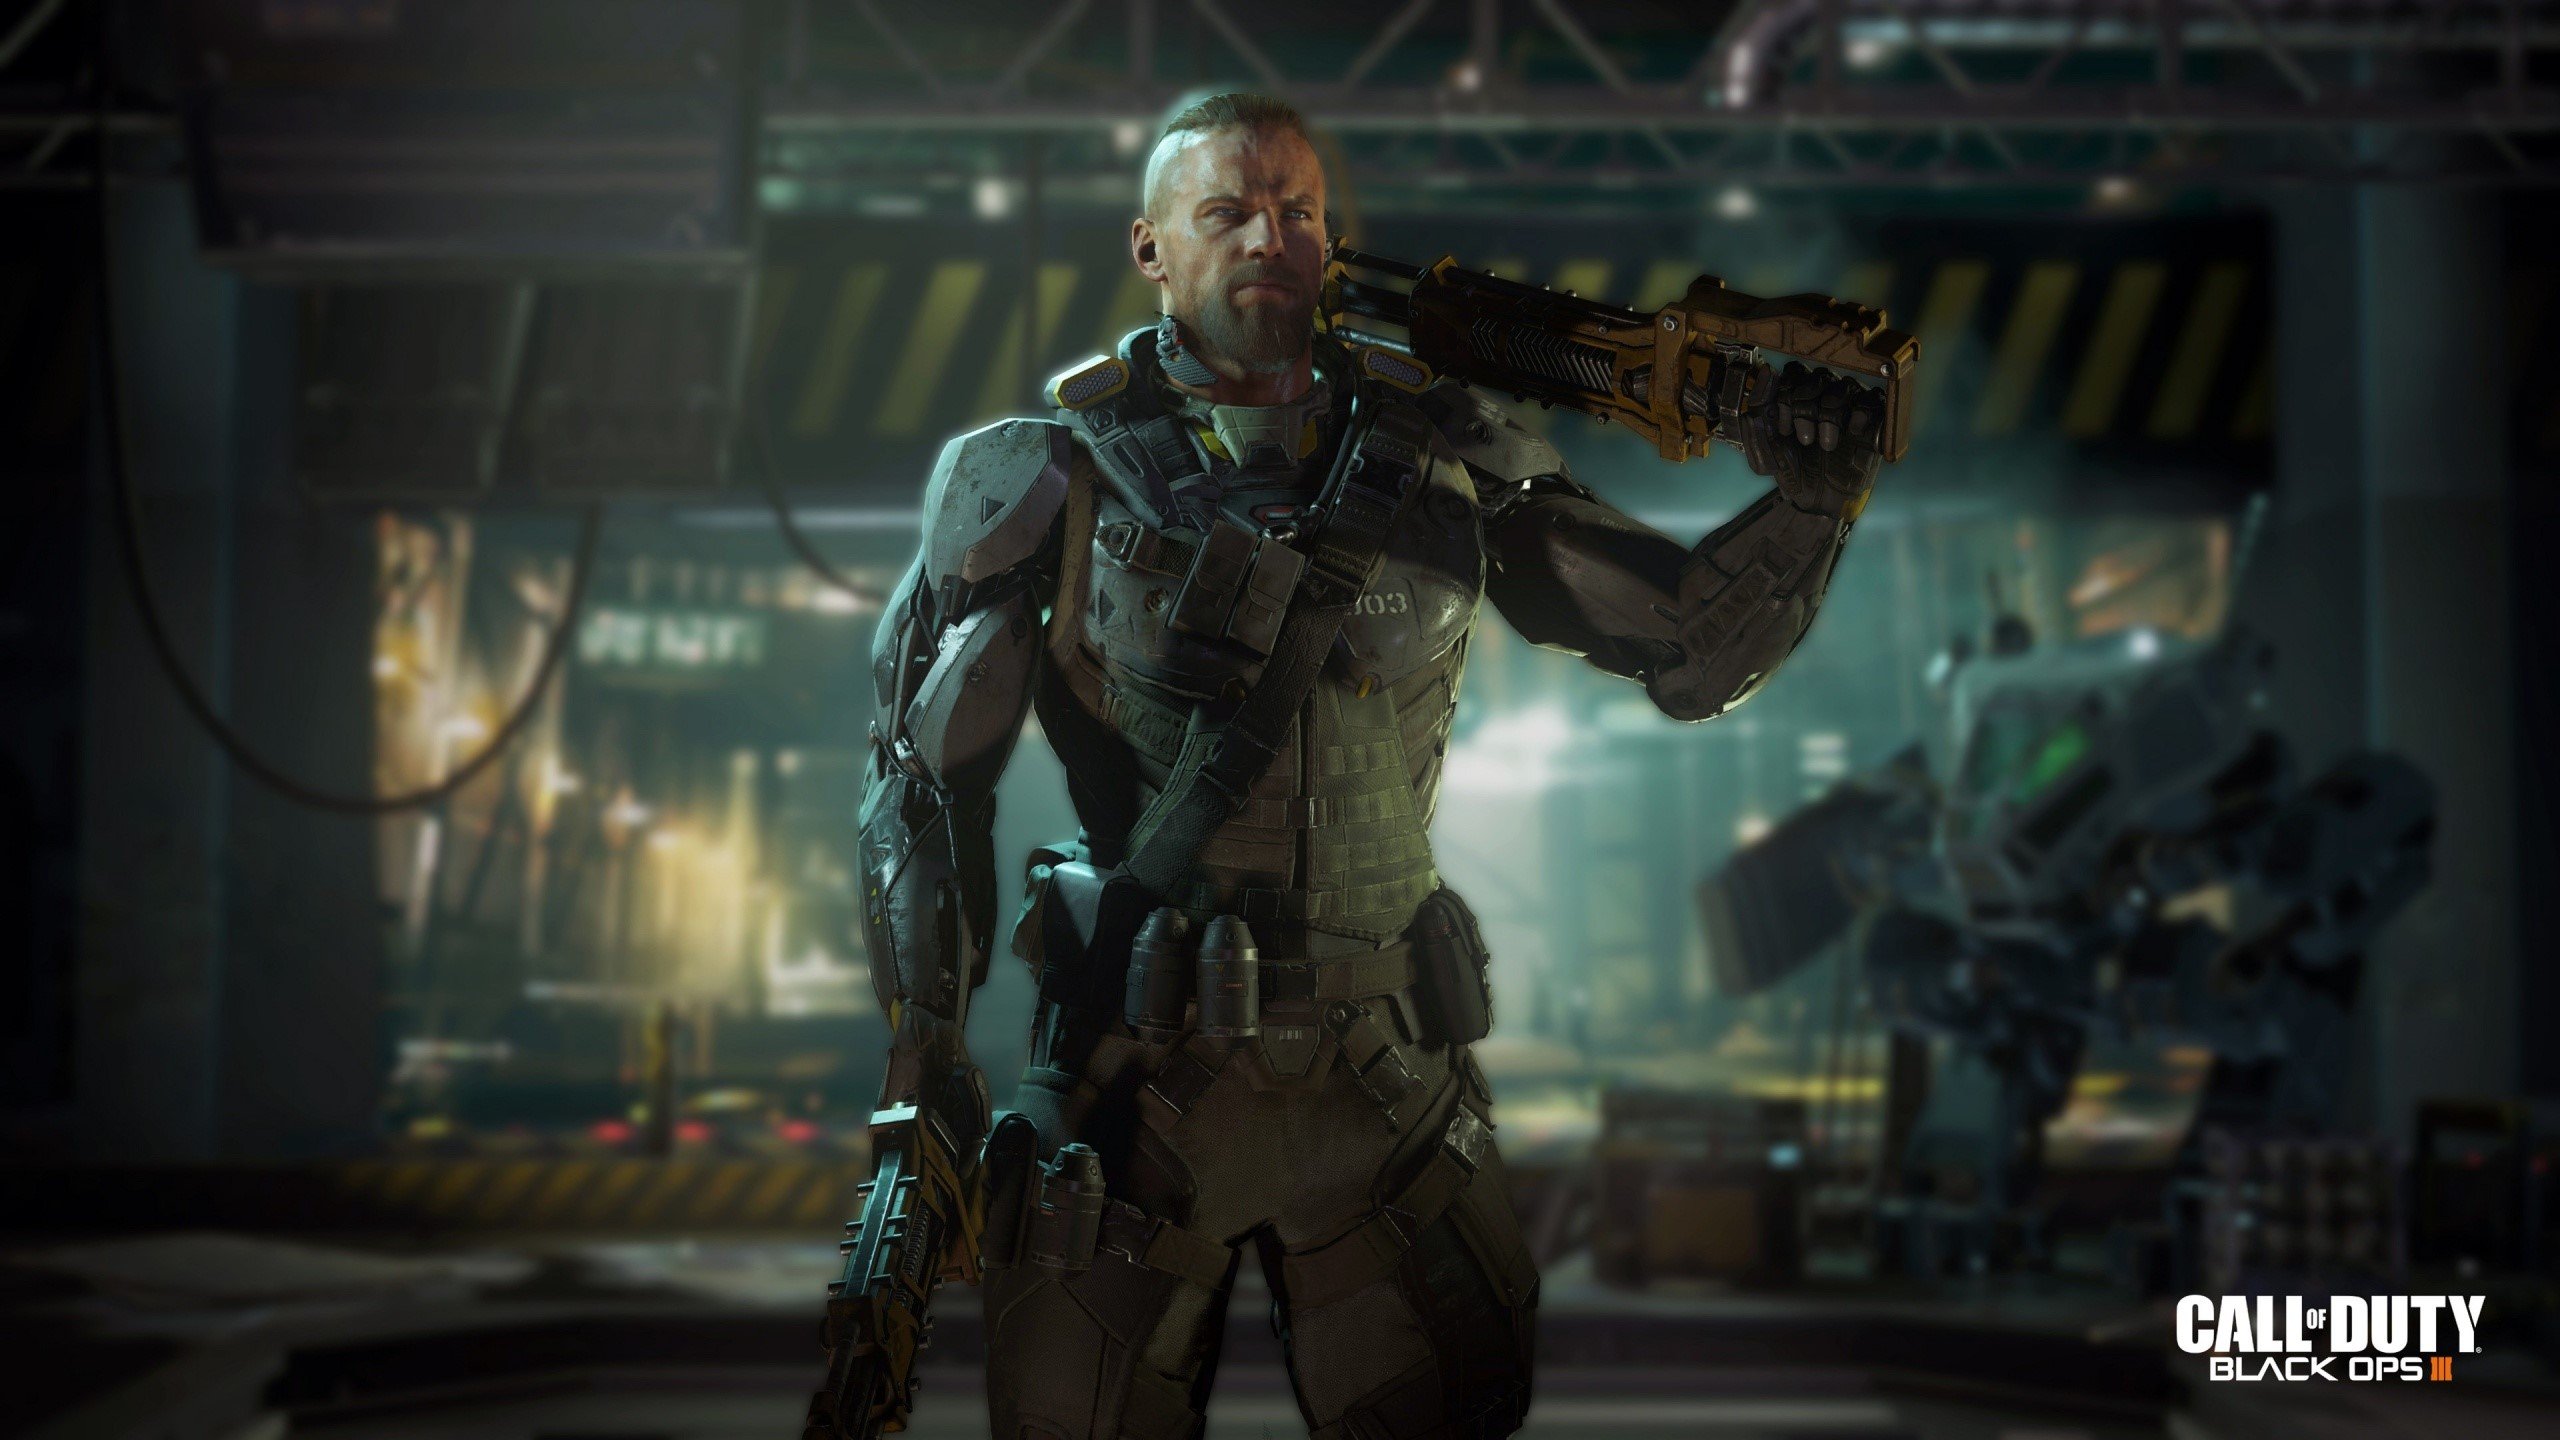 Wallpaper Call of Duty Black Ops 3